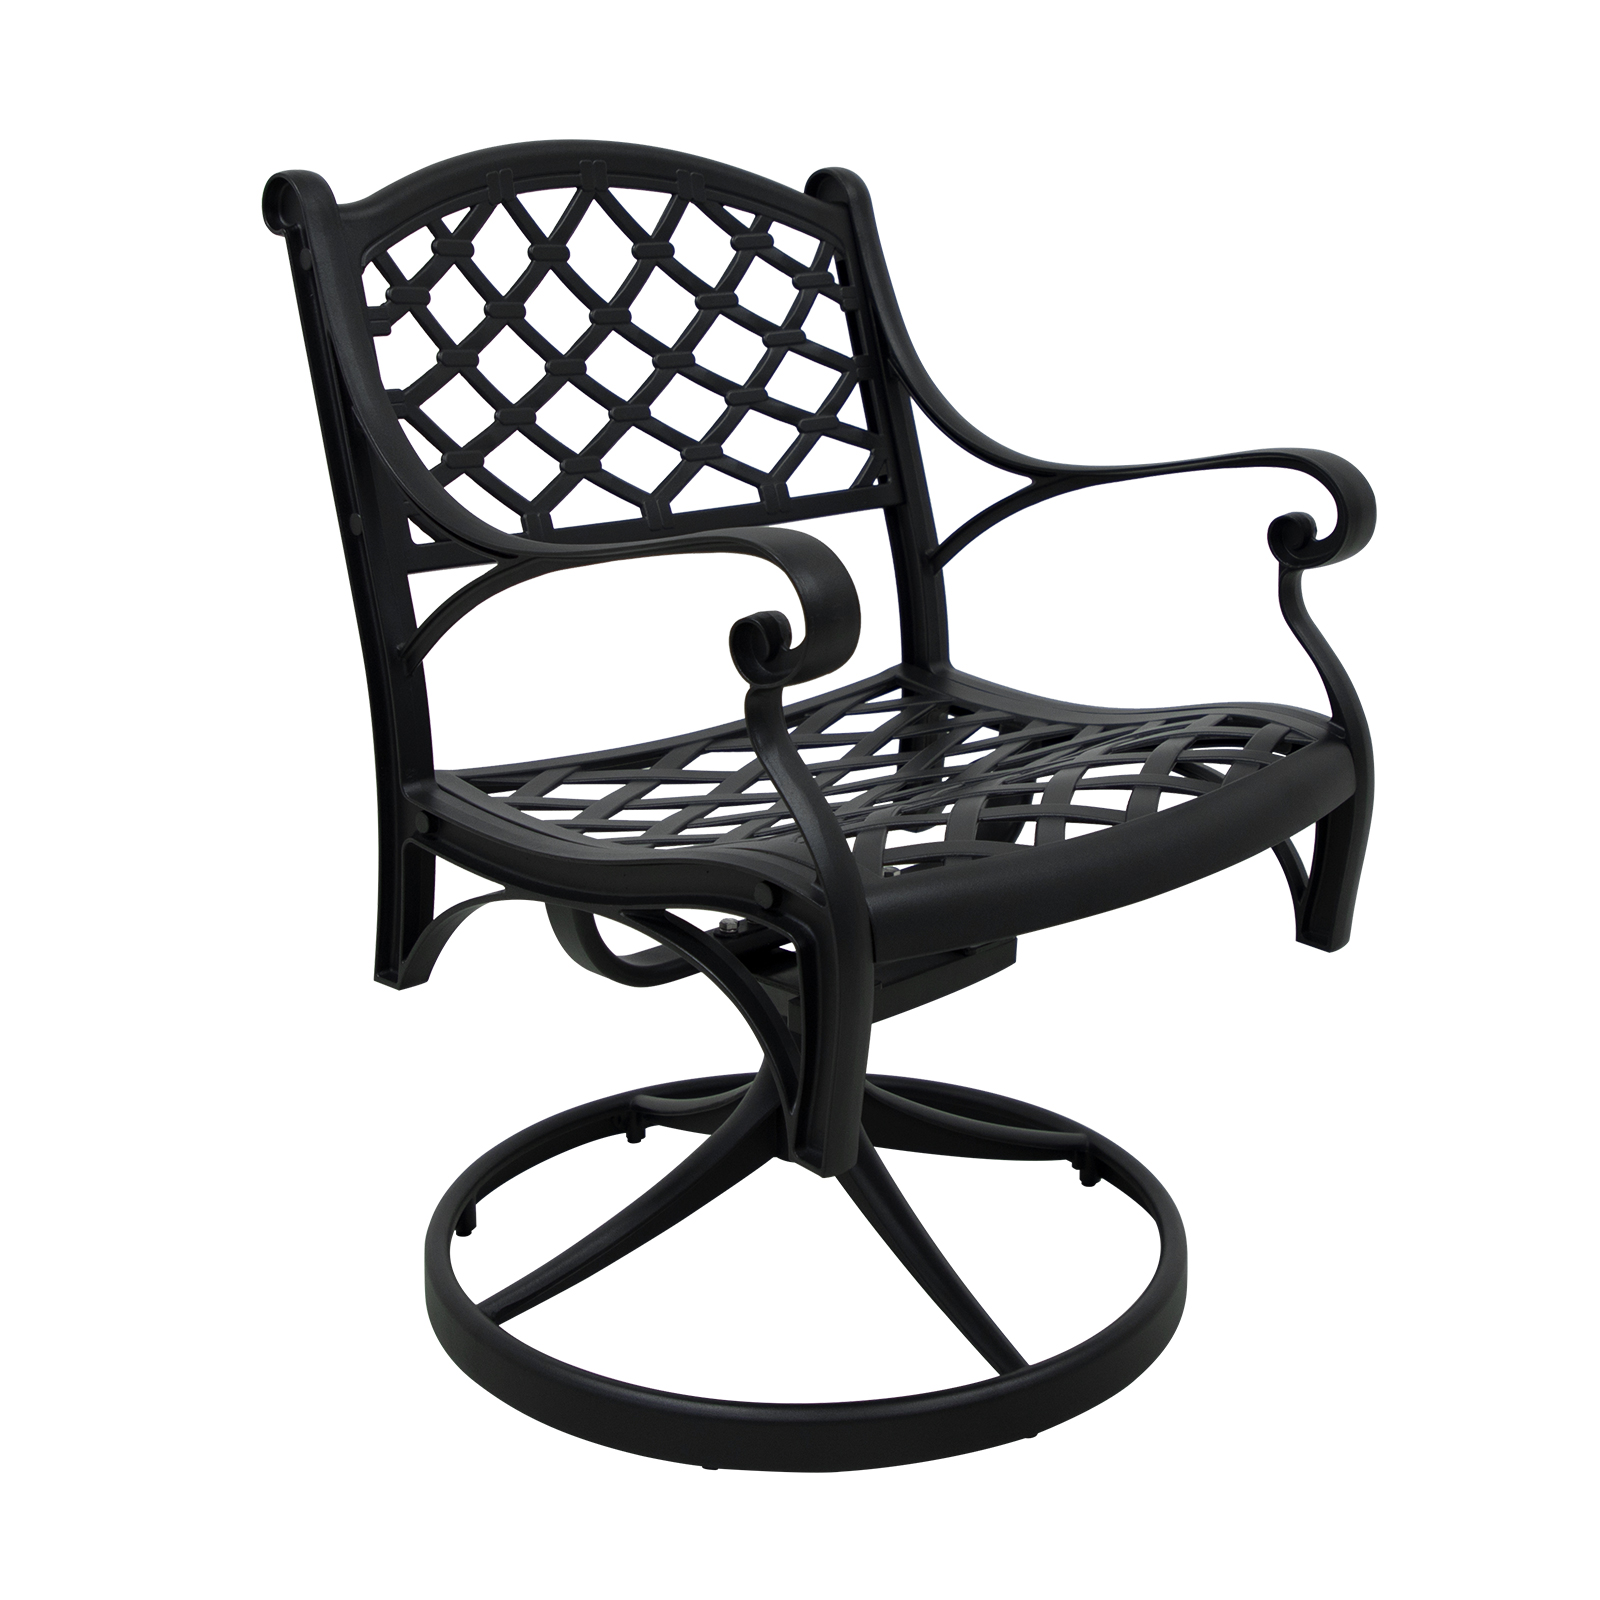 Outdoor Patio Swivel Dining Chair,Swivel Rocker Chairs with High Back Cast Aluminum Frame, Weather Resistant Metal Furniture for Lawn Backyard, Outdoor Dining Rocker Chair for Garden Backyard, Black - image 1 of 7